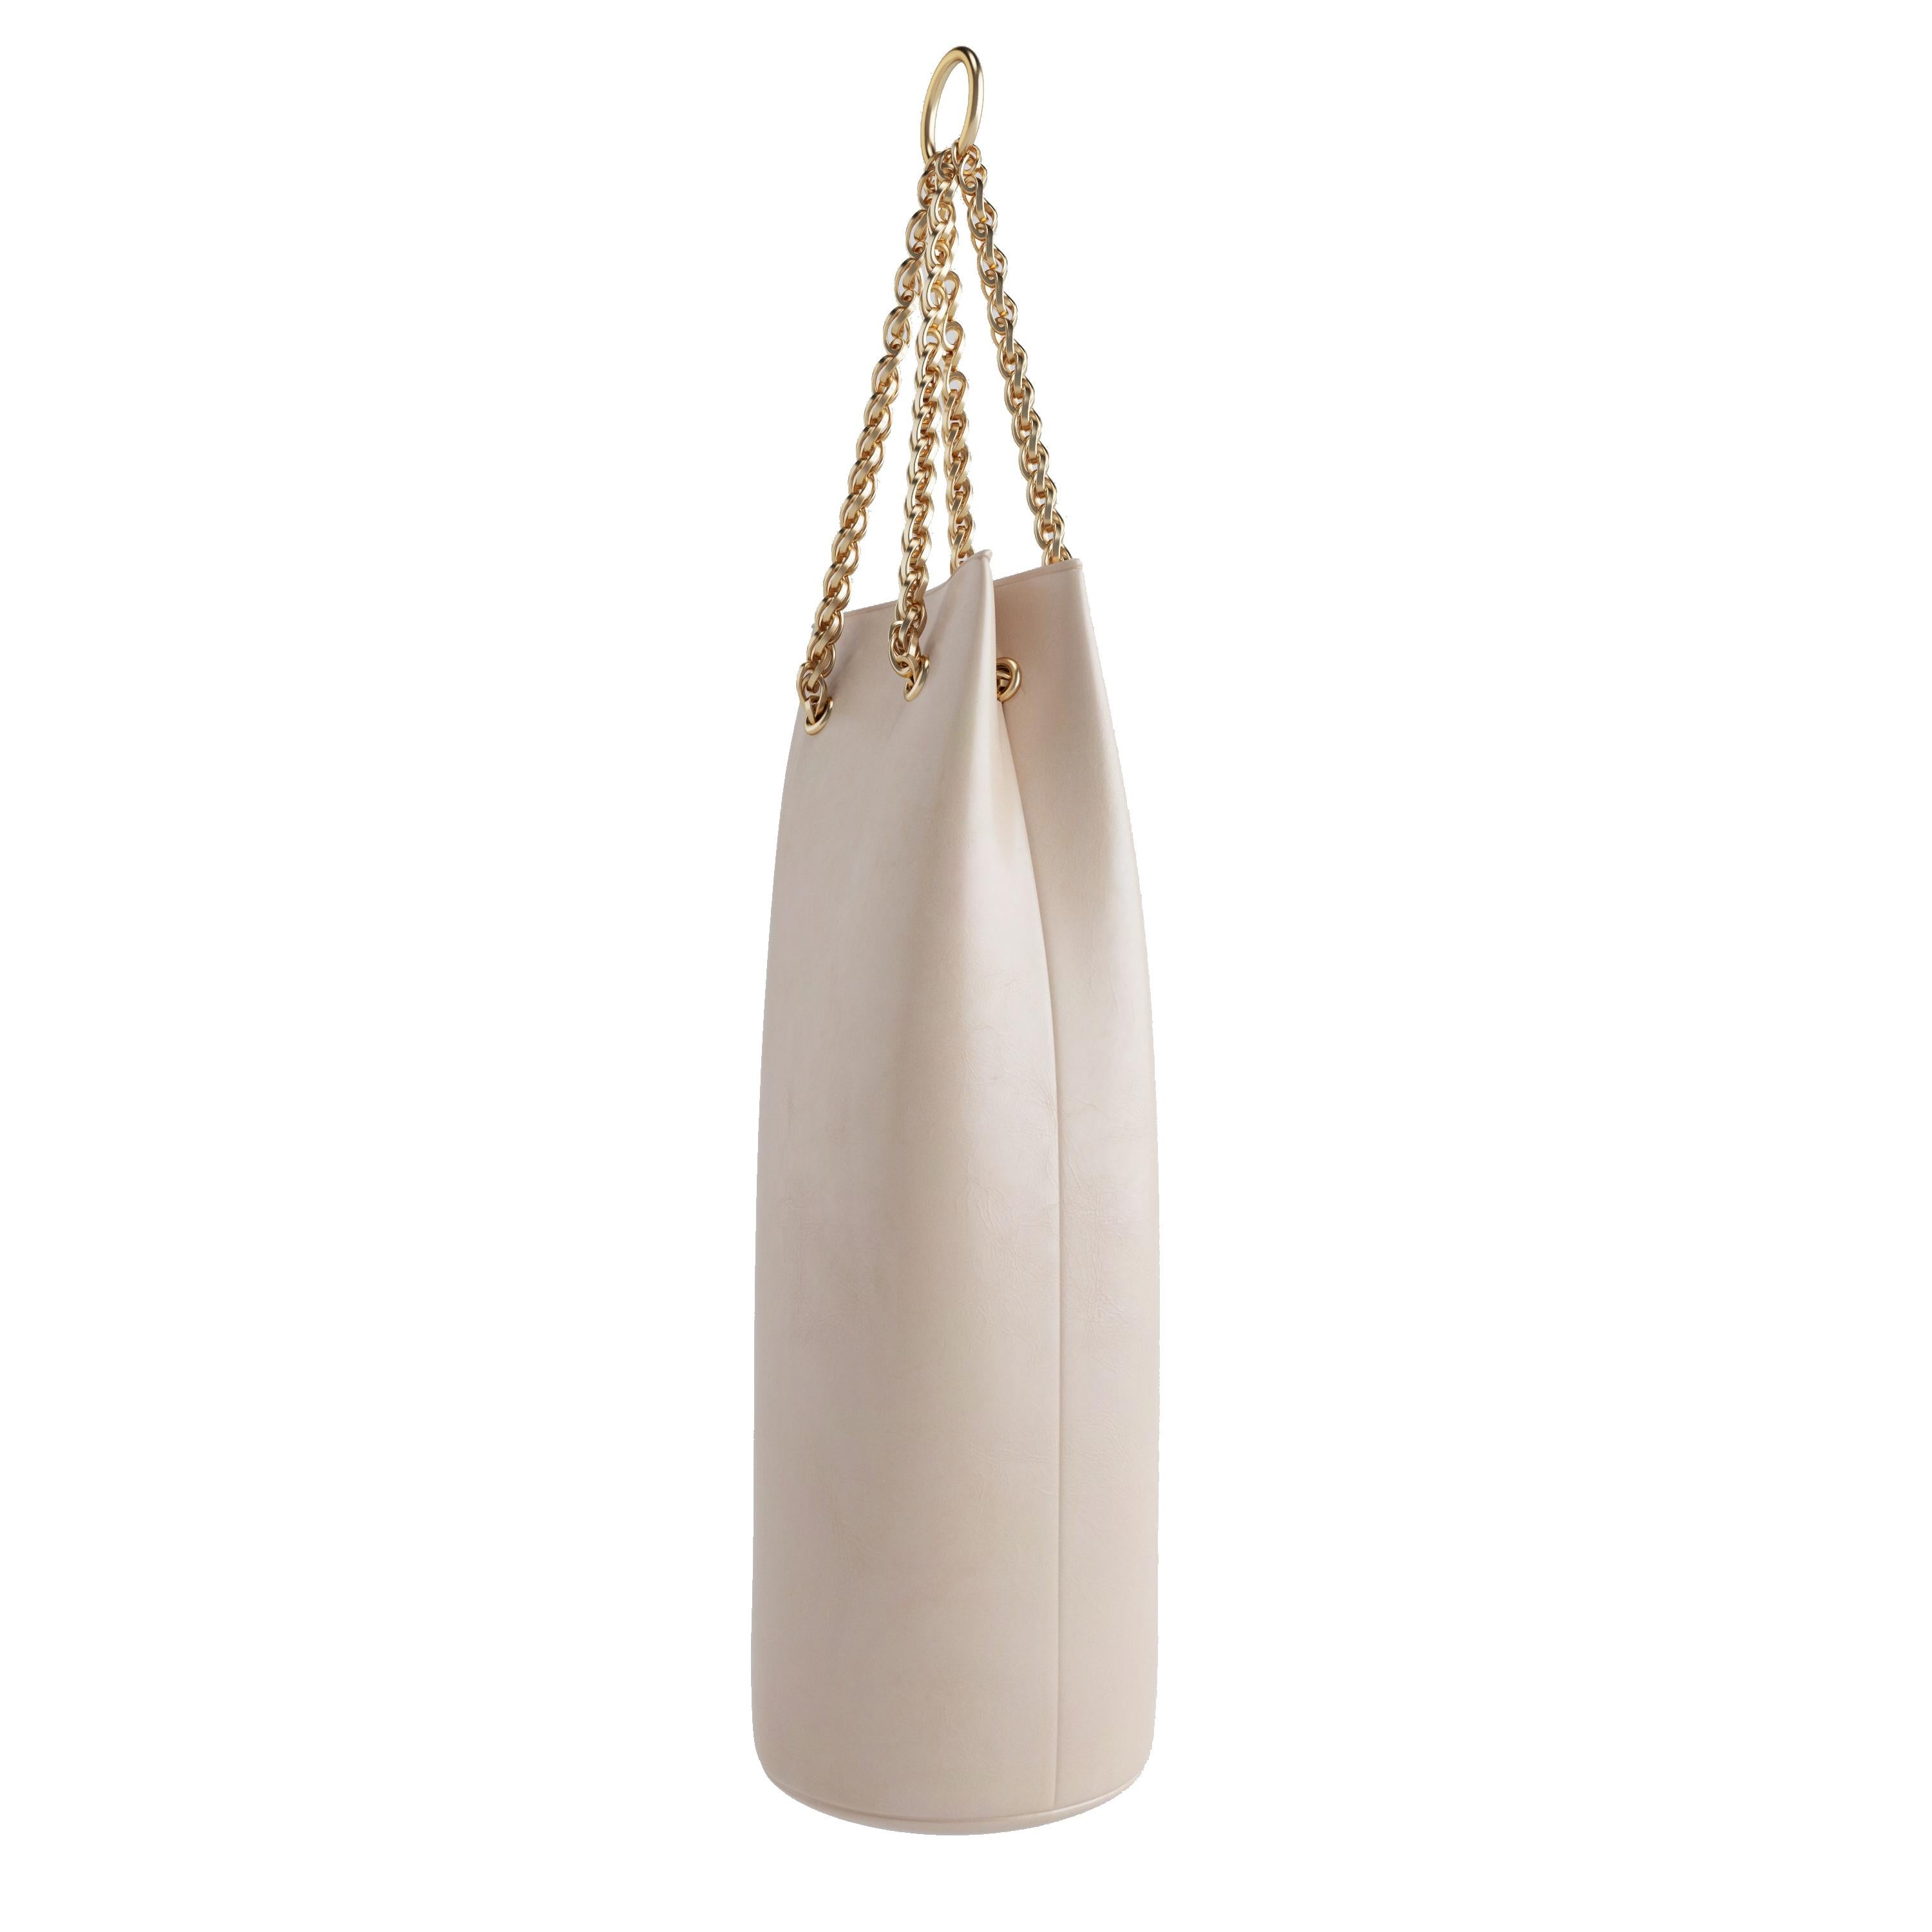 Zeville Beige Handcrafted Leather "Punching Bag" For Sale at 1stDibs